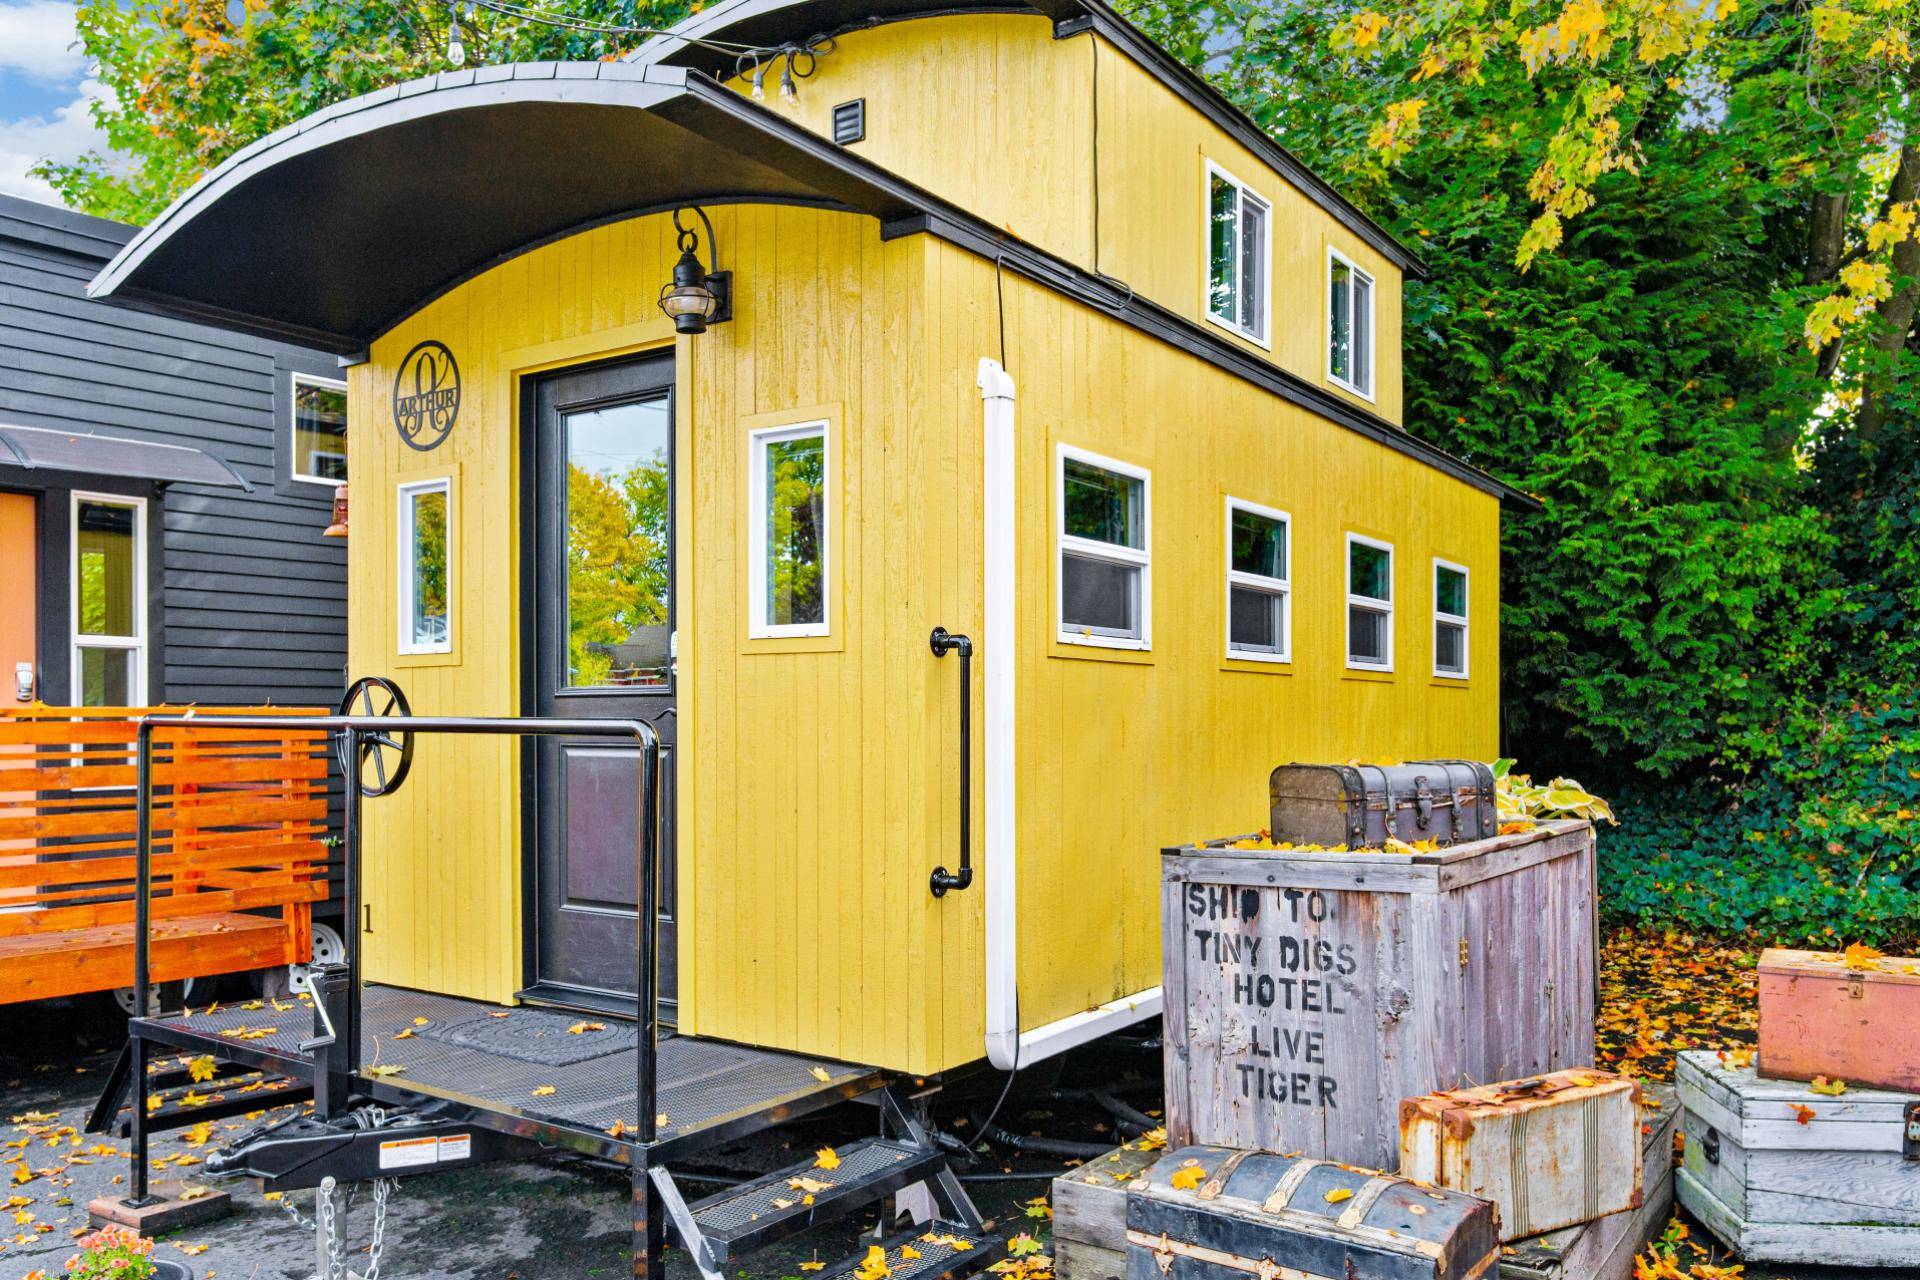 https://s1.cdn.autoevolution.com/images/news/arthur-is-a-gorgeous-caboose-inspired-tiny-trying-to-get-you-into-tiny-living-202569_1.jpg